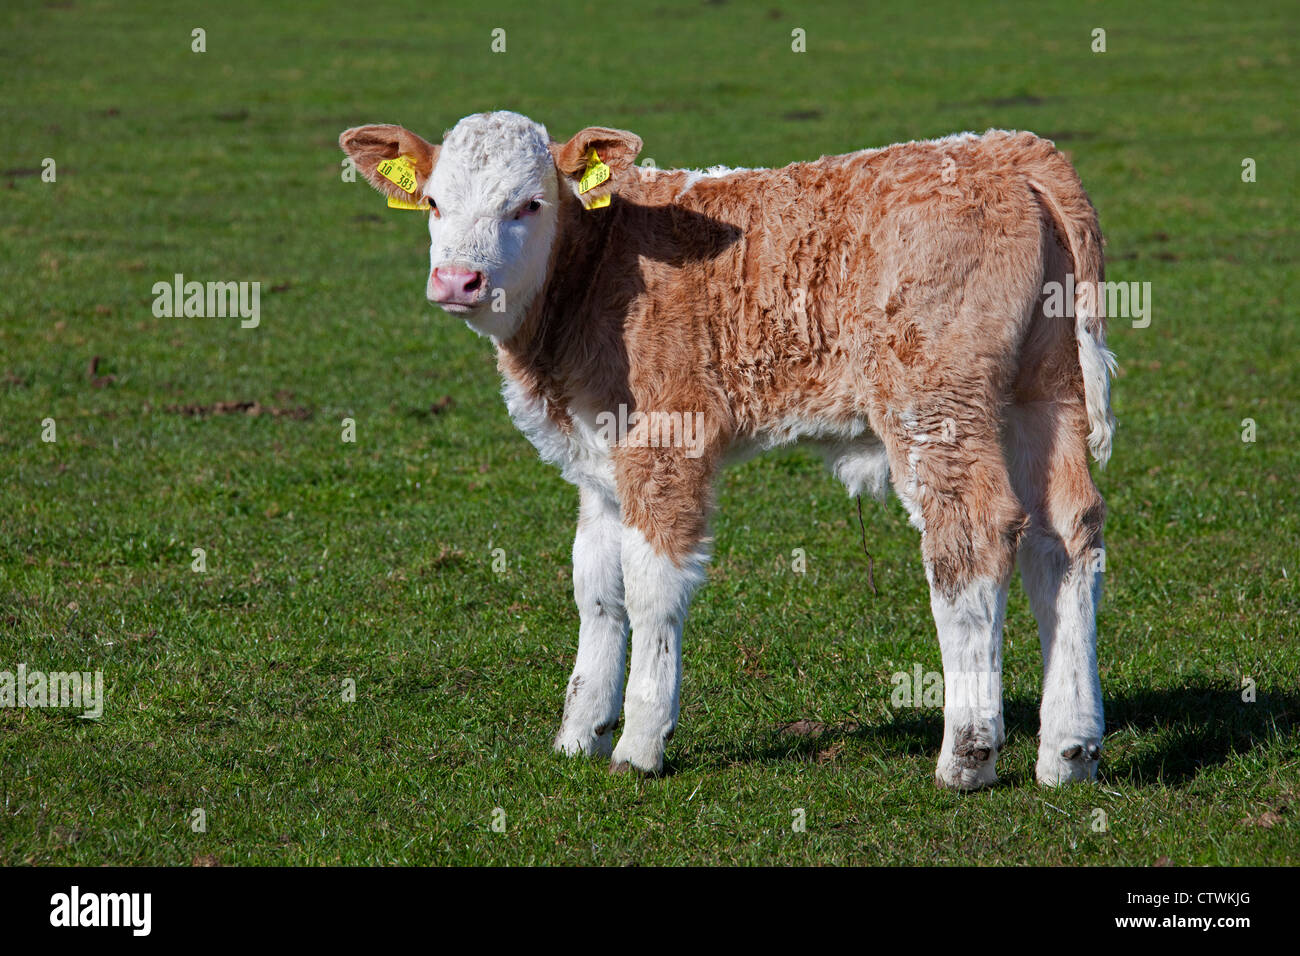 Calf (Bos taurus) from domestic cow marked with yellow ear tags in both ears in field, Germany Stock Photo